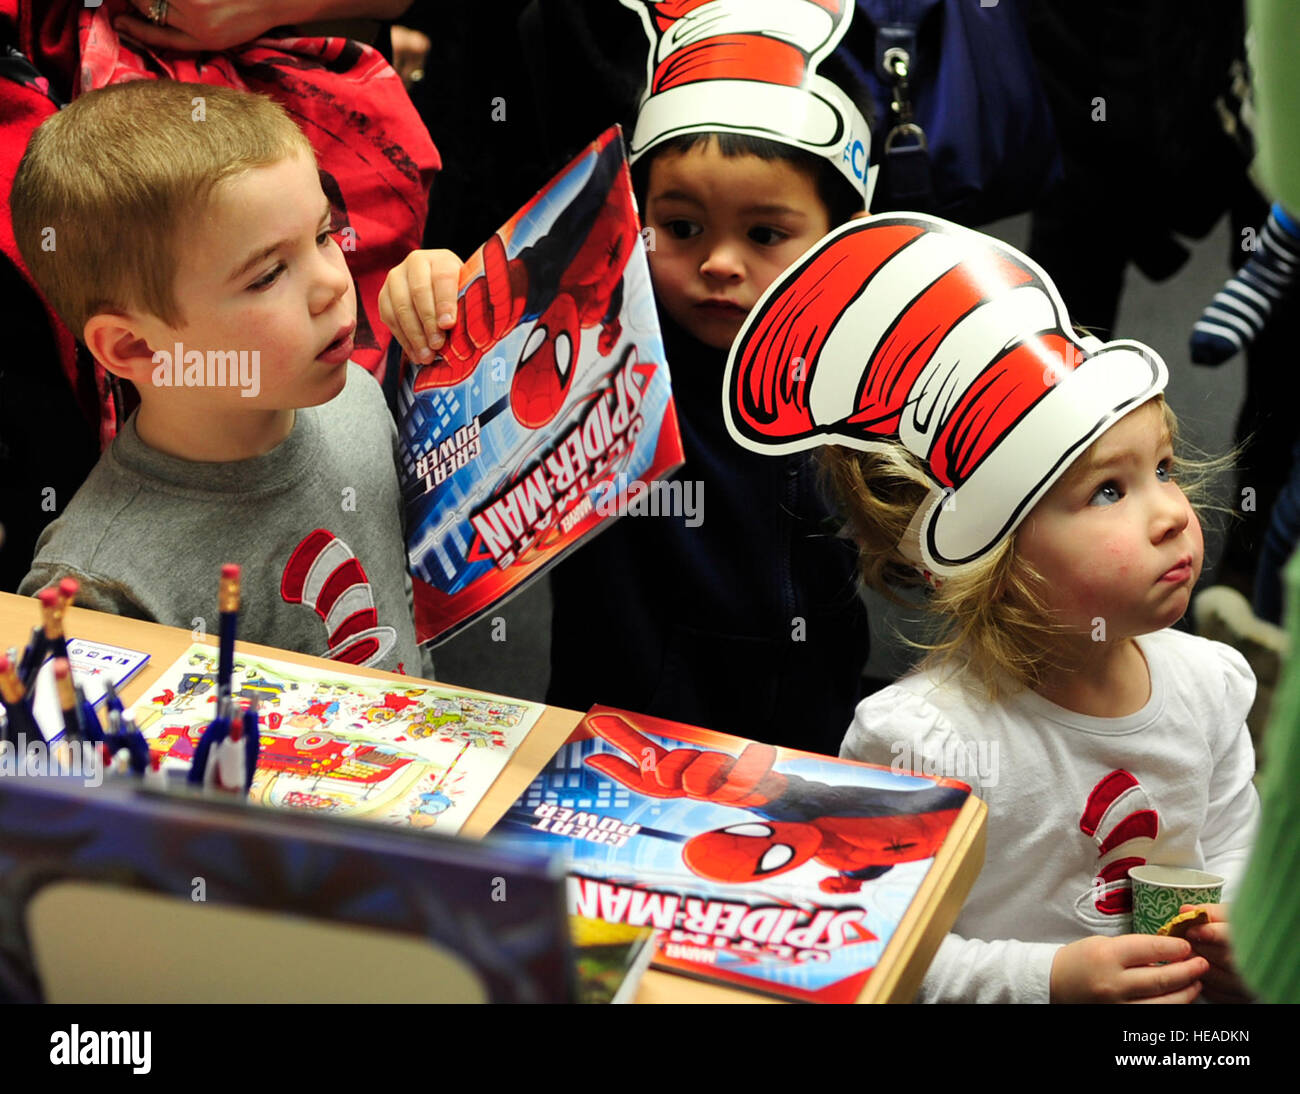 Children receive free books during Read Across America, March 5, 2015, at Ramstein Air Base, Germany. The event consisted of story-time, snacks and free books for the children. Airman 1st Class Larissa Greatwood) Stock Photo